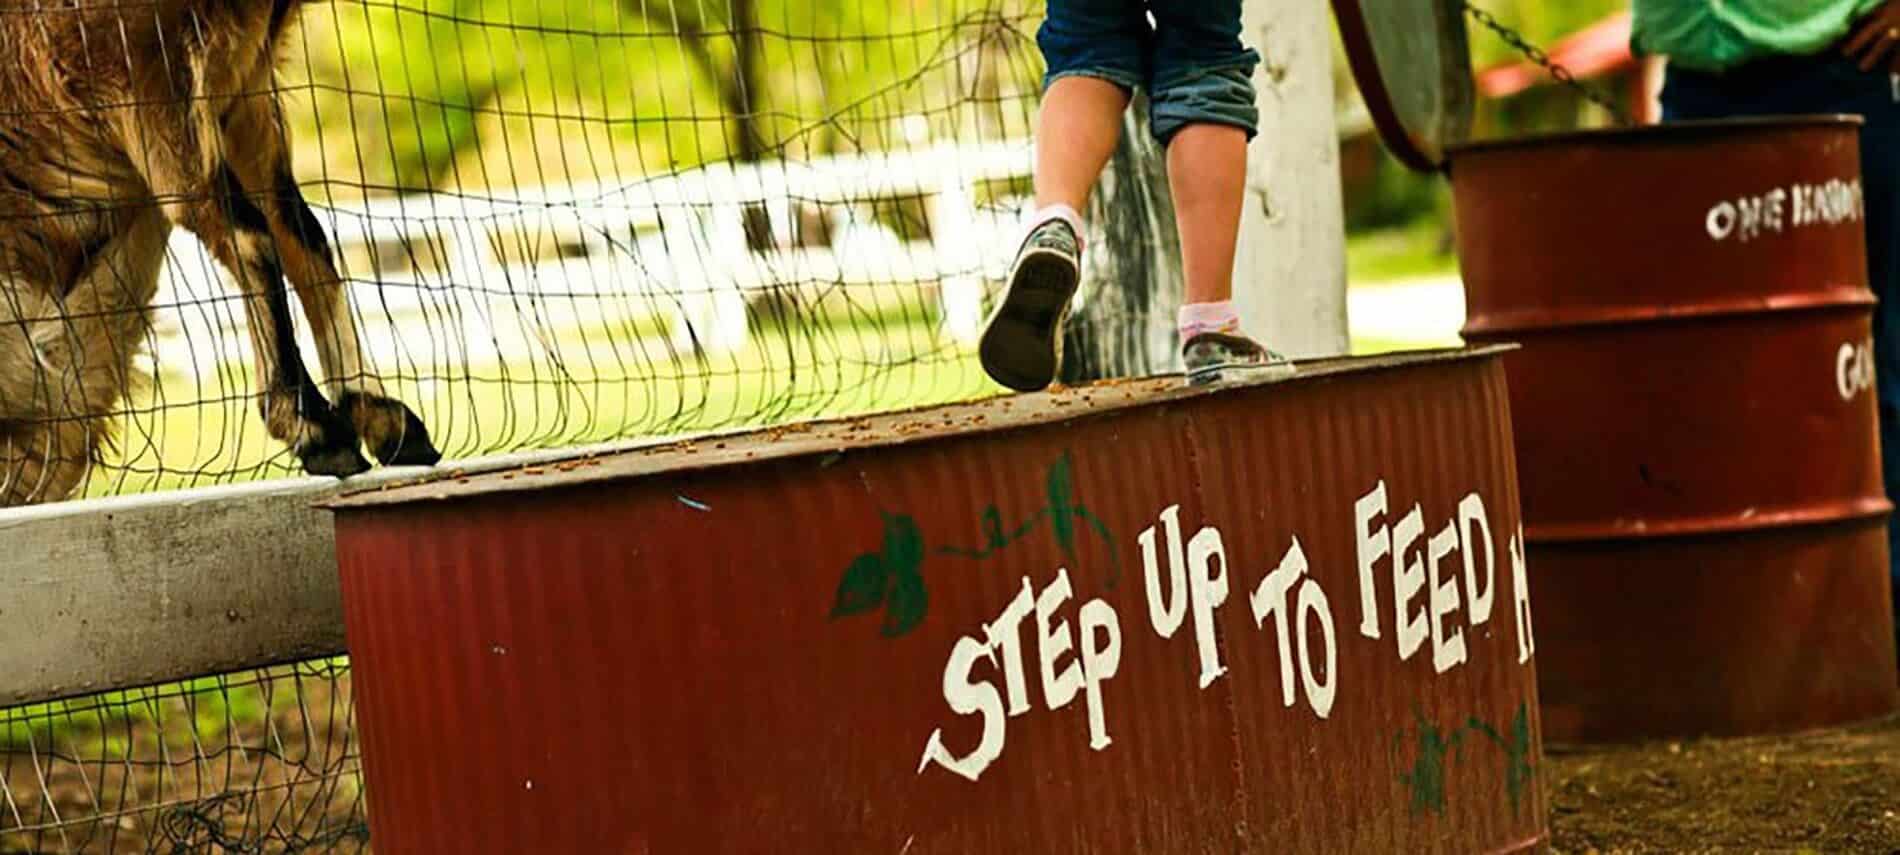 A child's feet walk along a stock tank painted with "Step up to feed me" as a goat leans on the fence.